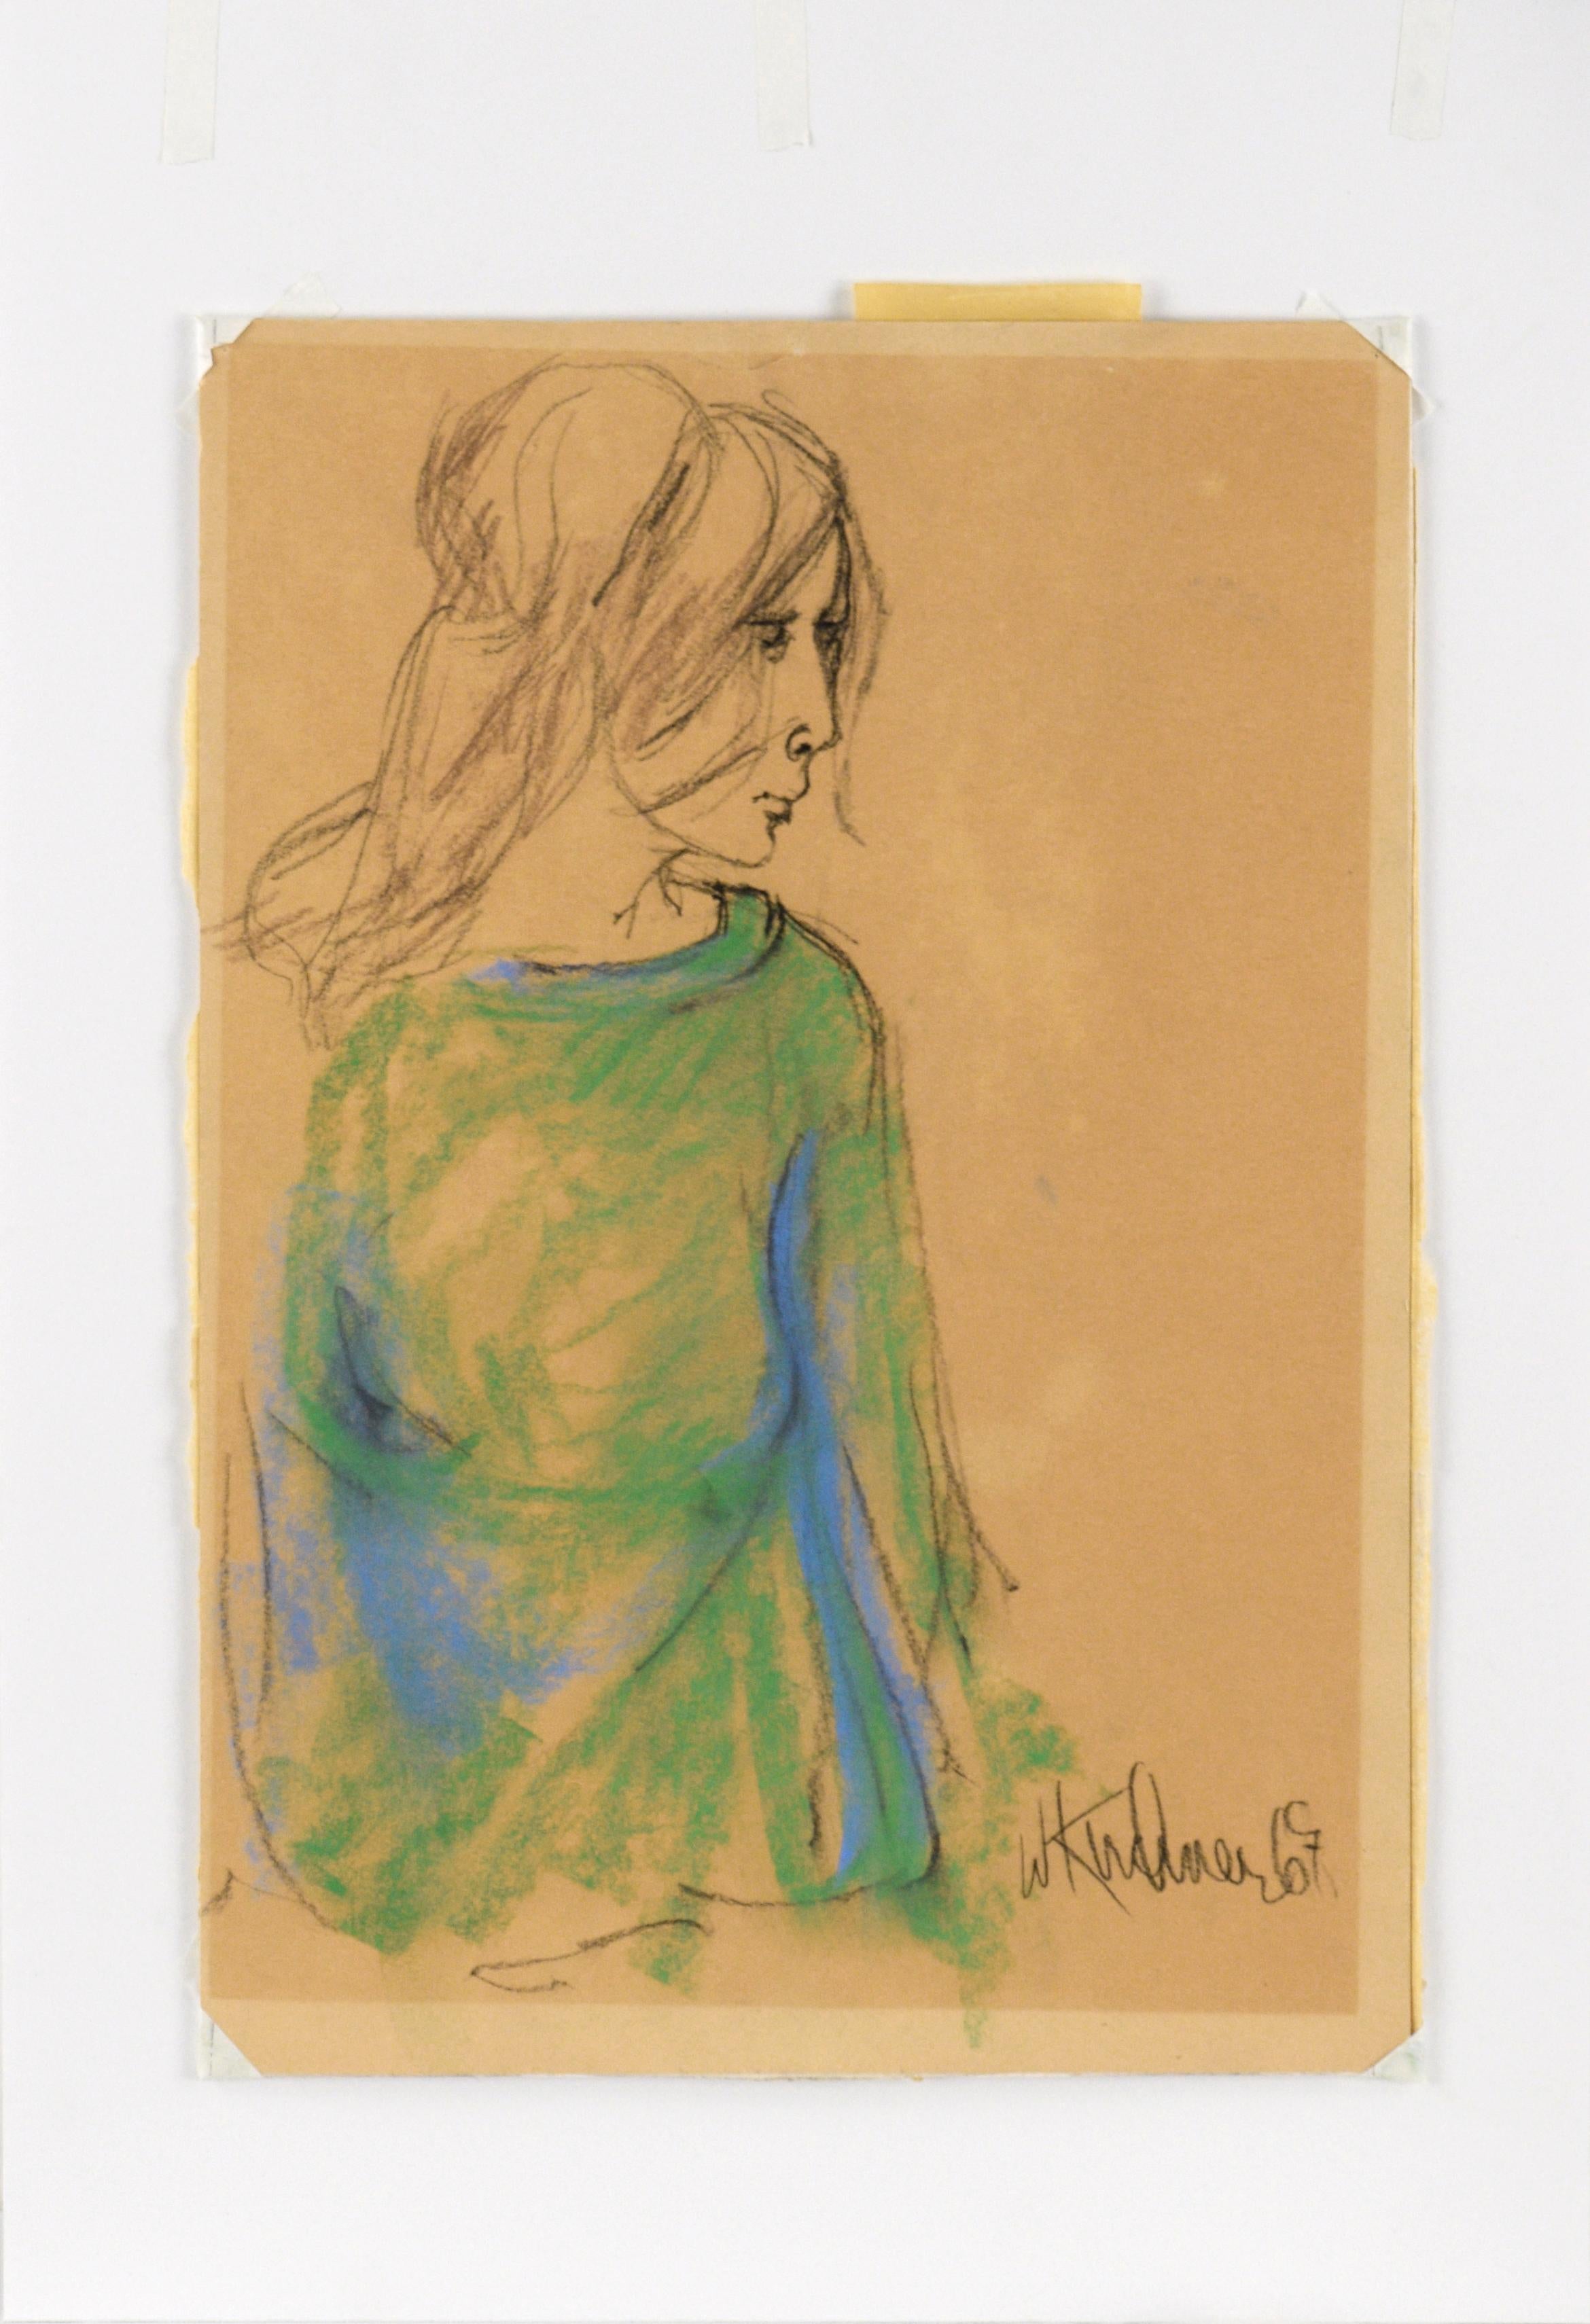 Portrait of a Woman in a Green Shirt -San Francisco Bay Area Figurative Movement - American Impressionist Art by William Kirchner